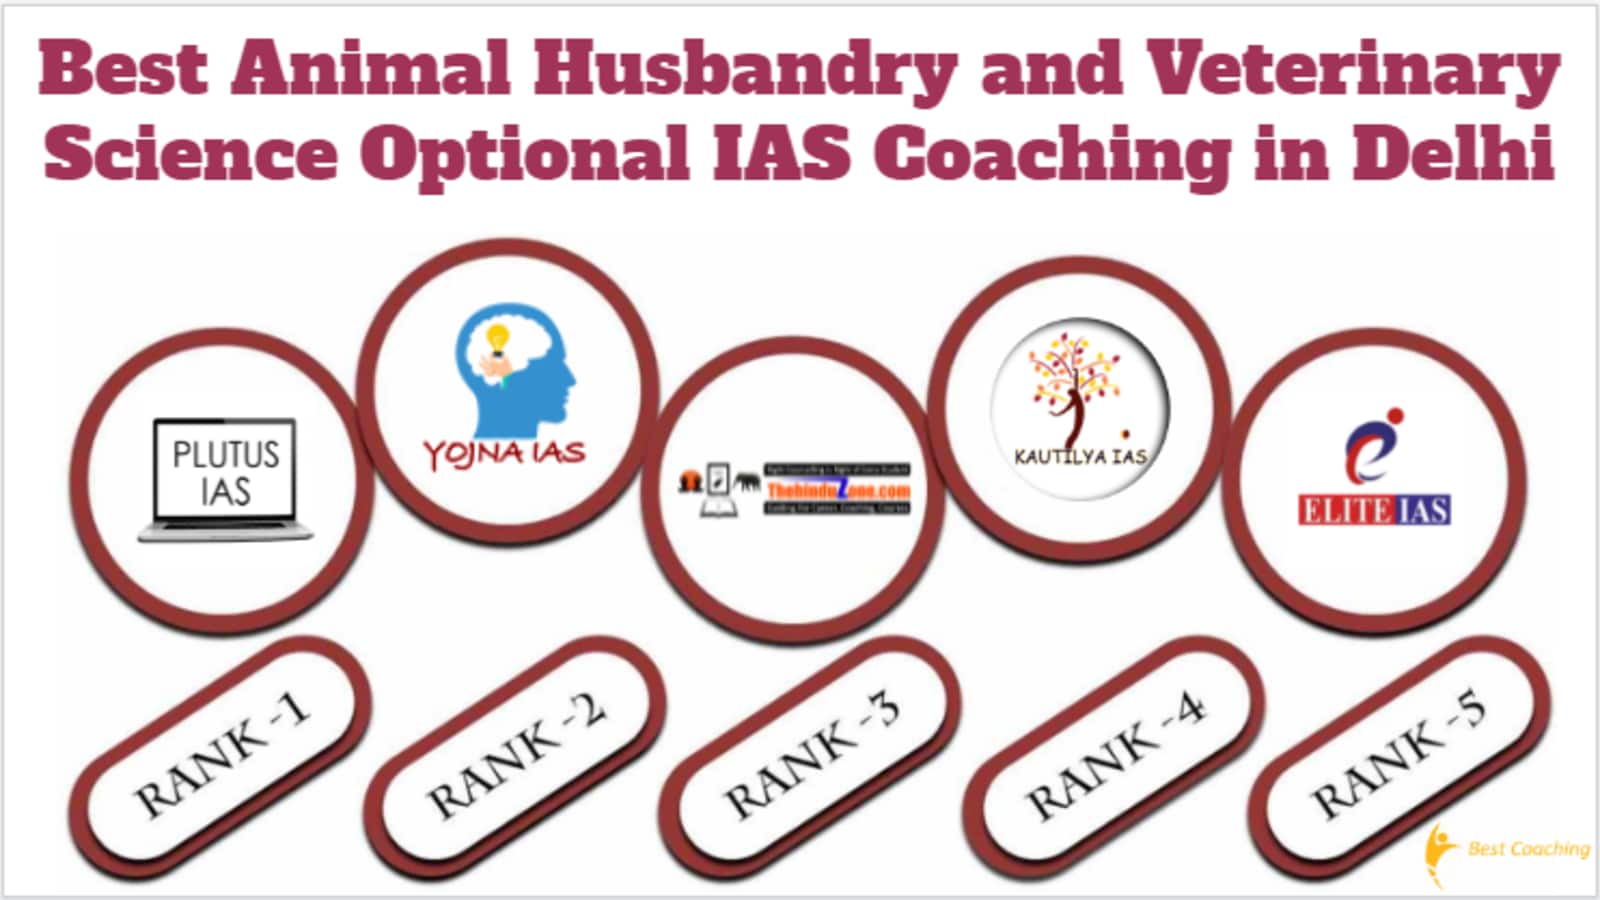 Best Animal Husbandry and Veterinary Science Optional IAS Coaching in Delhi  